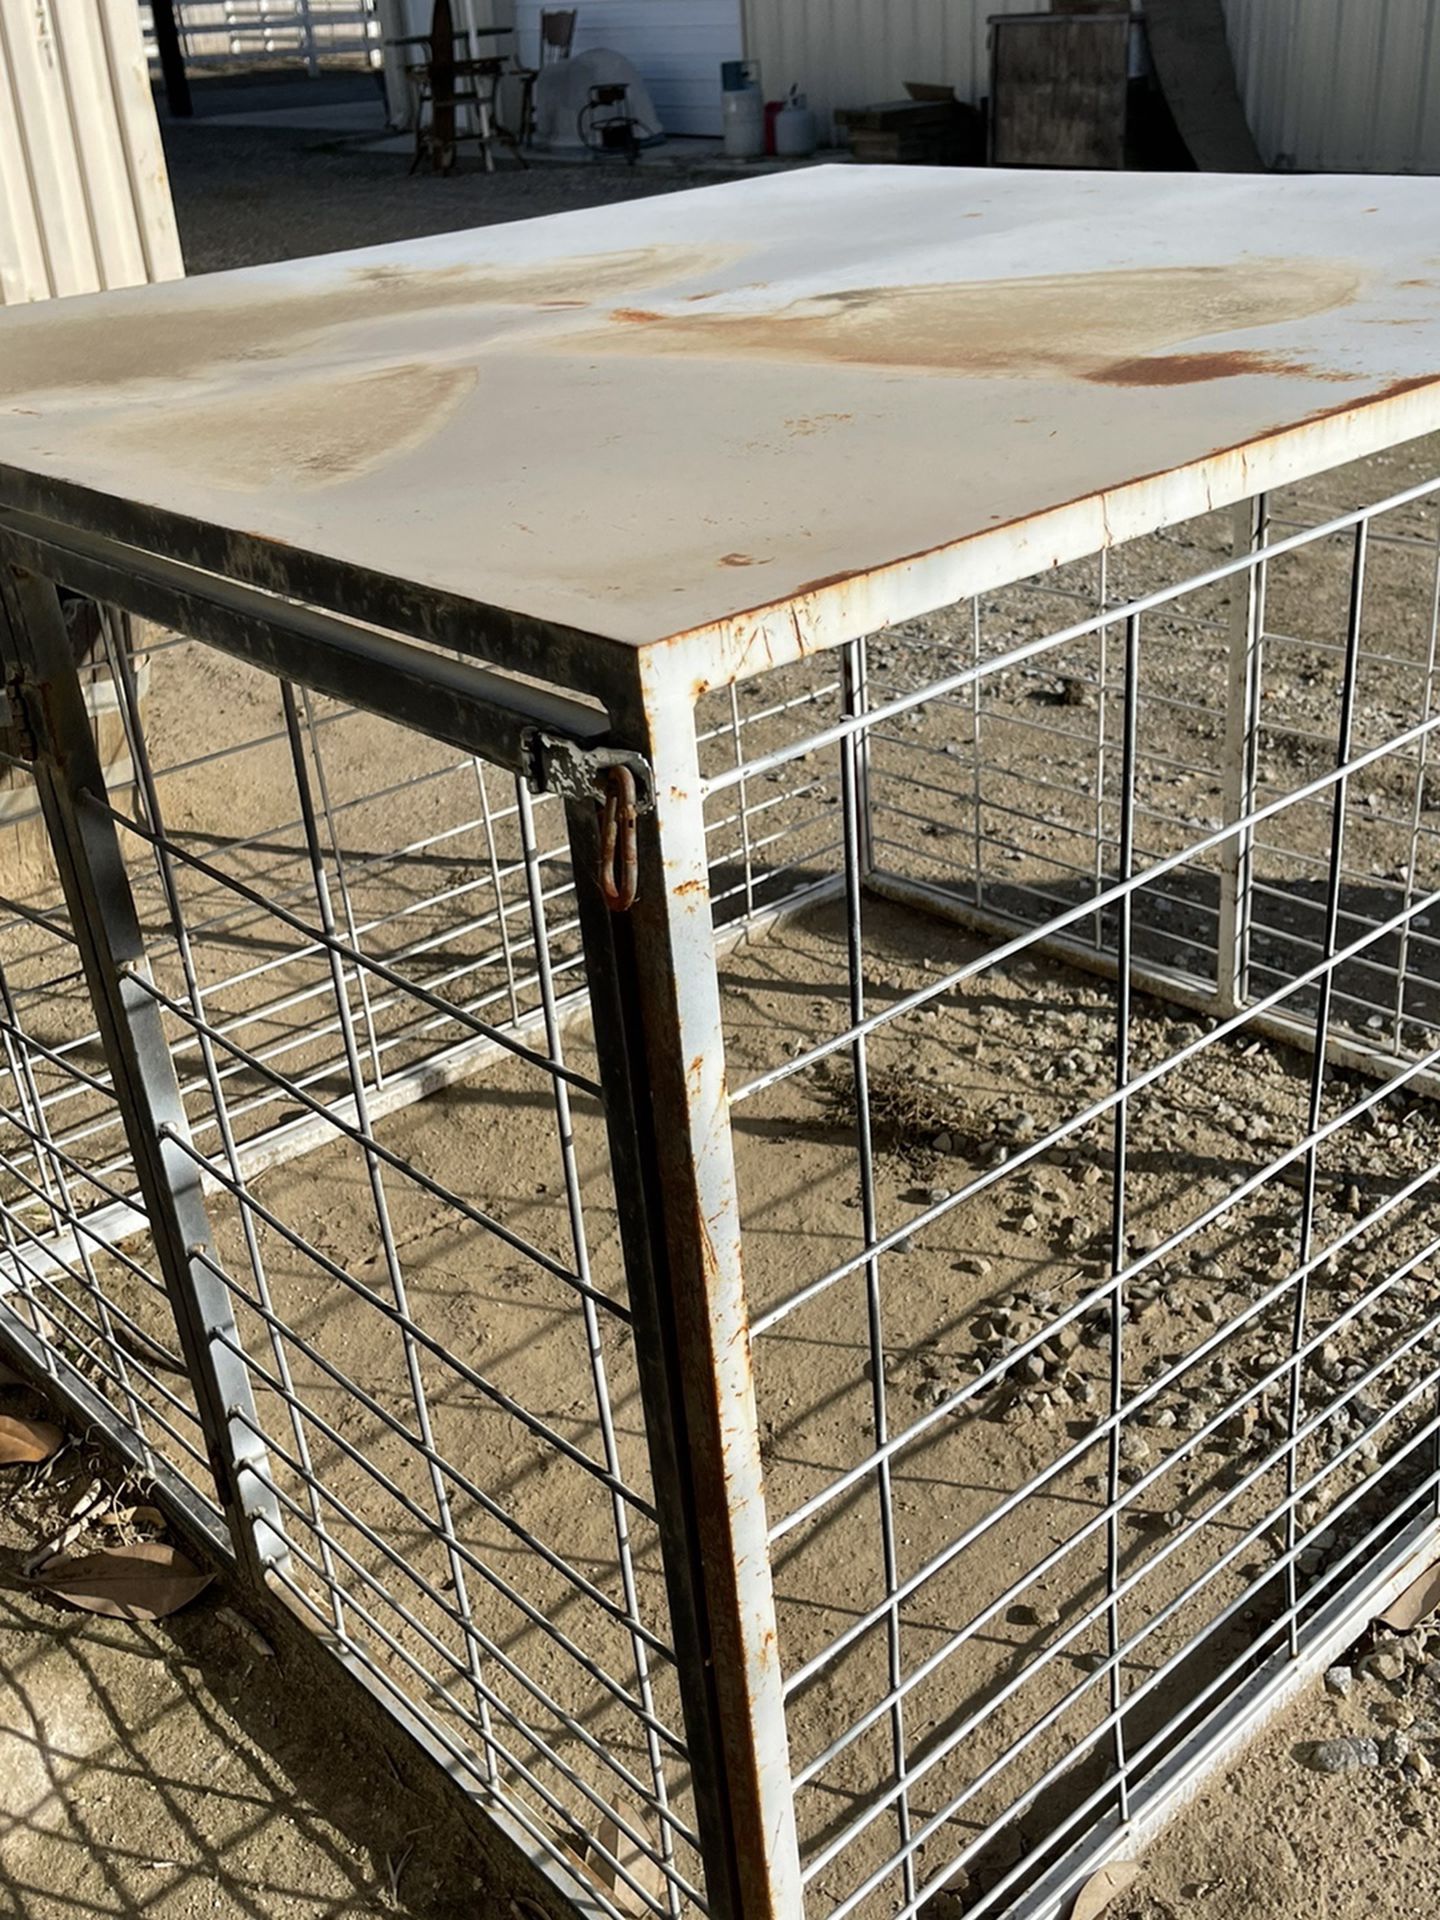 Truck Bed Livestock Cage